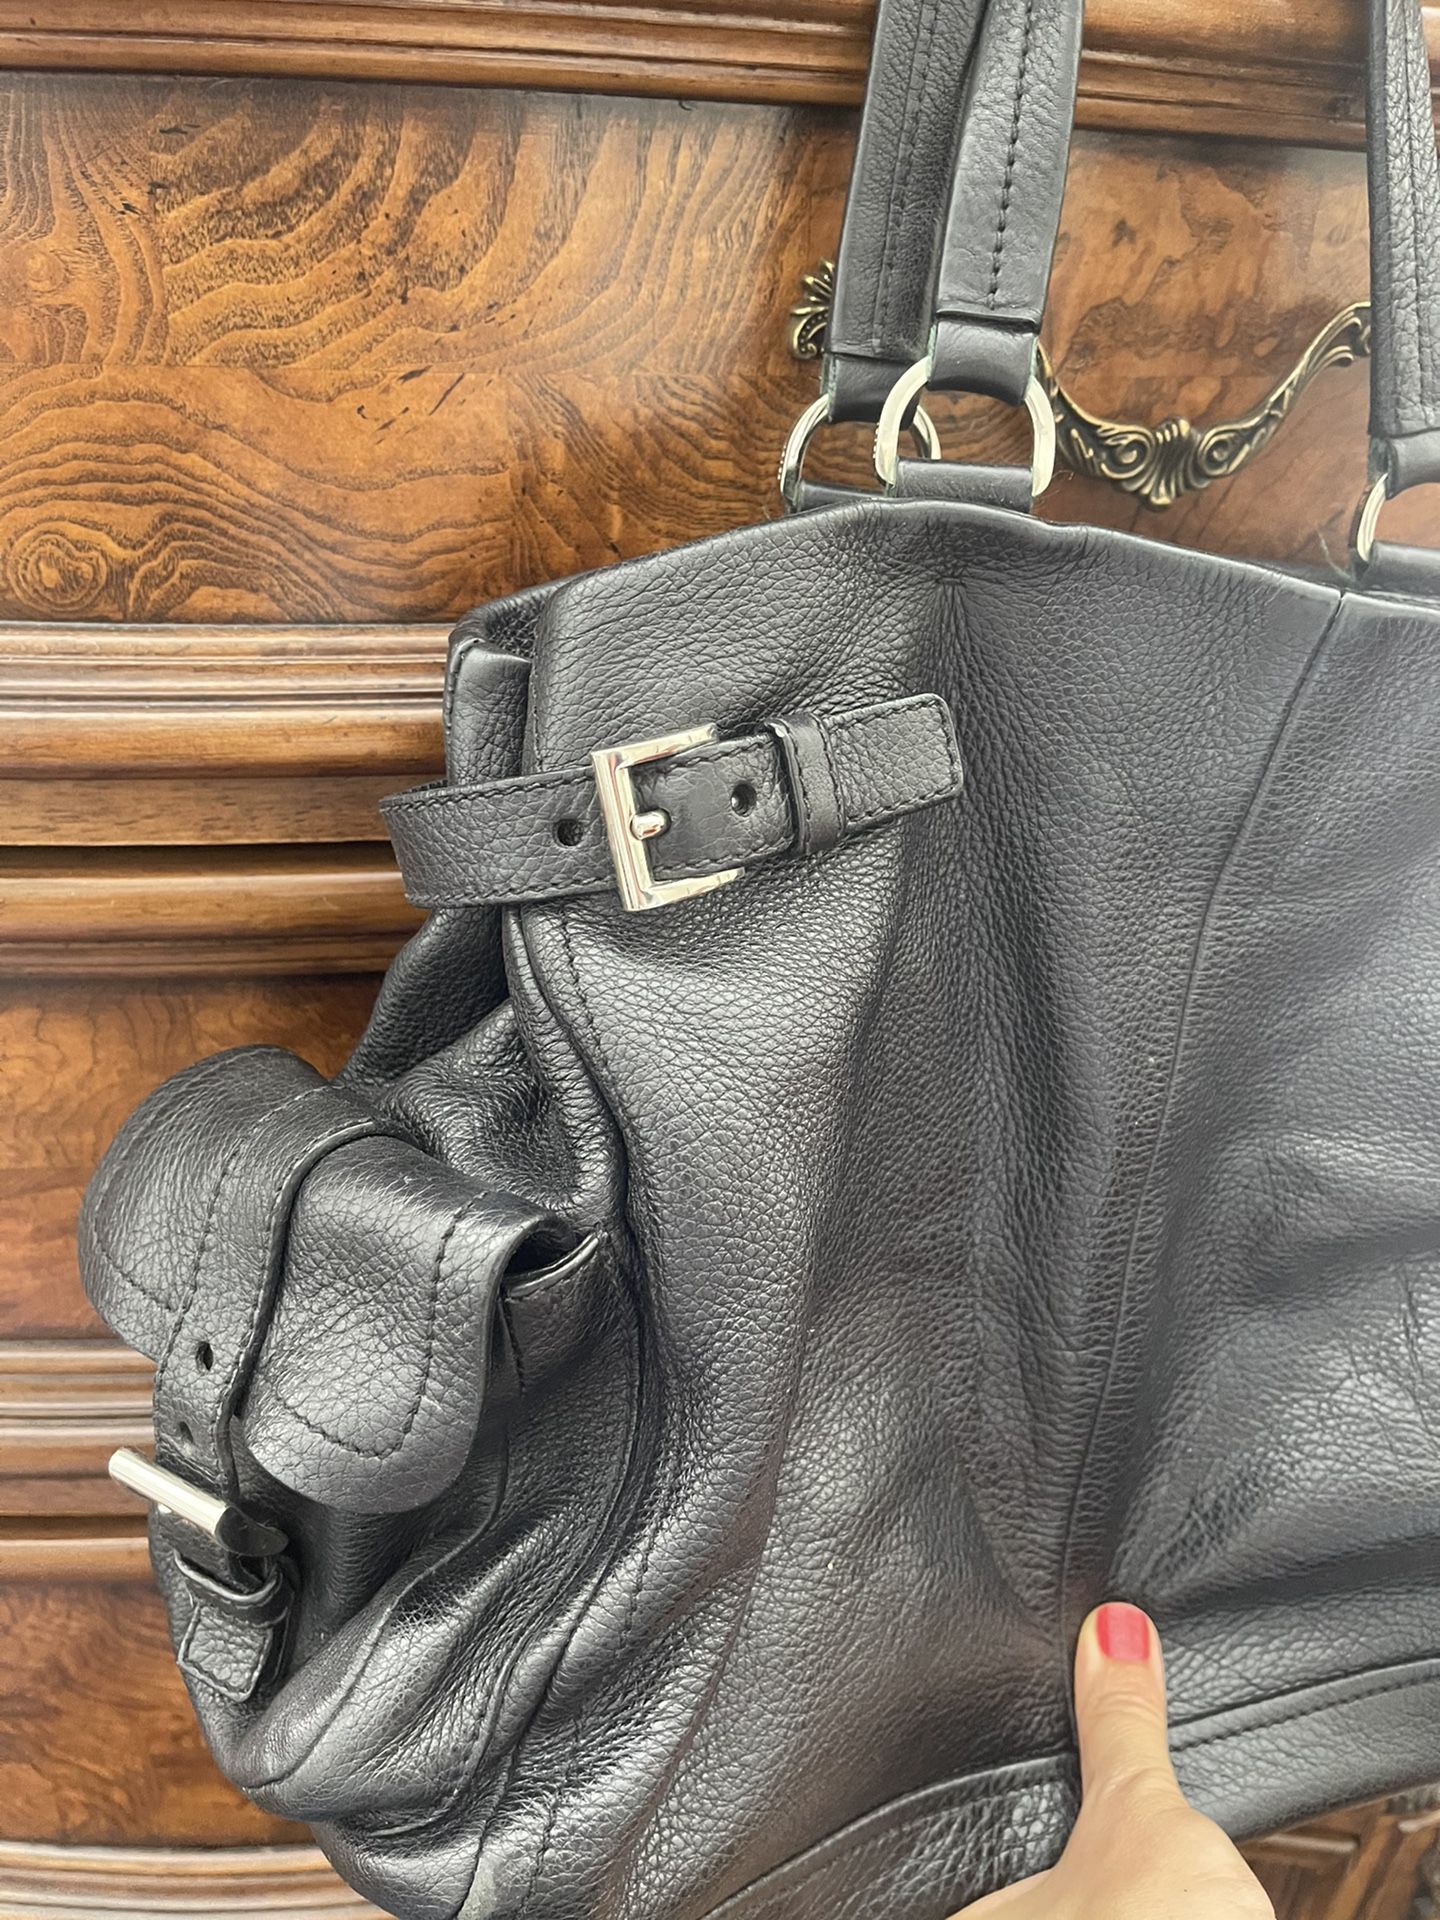 Prada Black Leather Bag Purse Great Condition  Reduced 